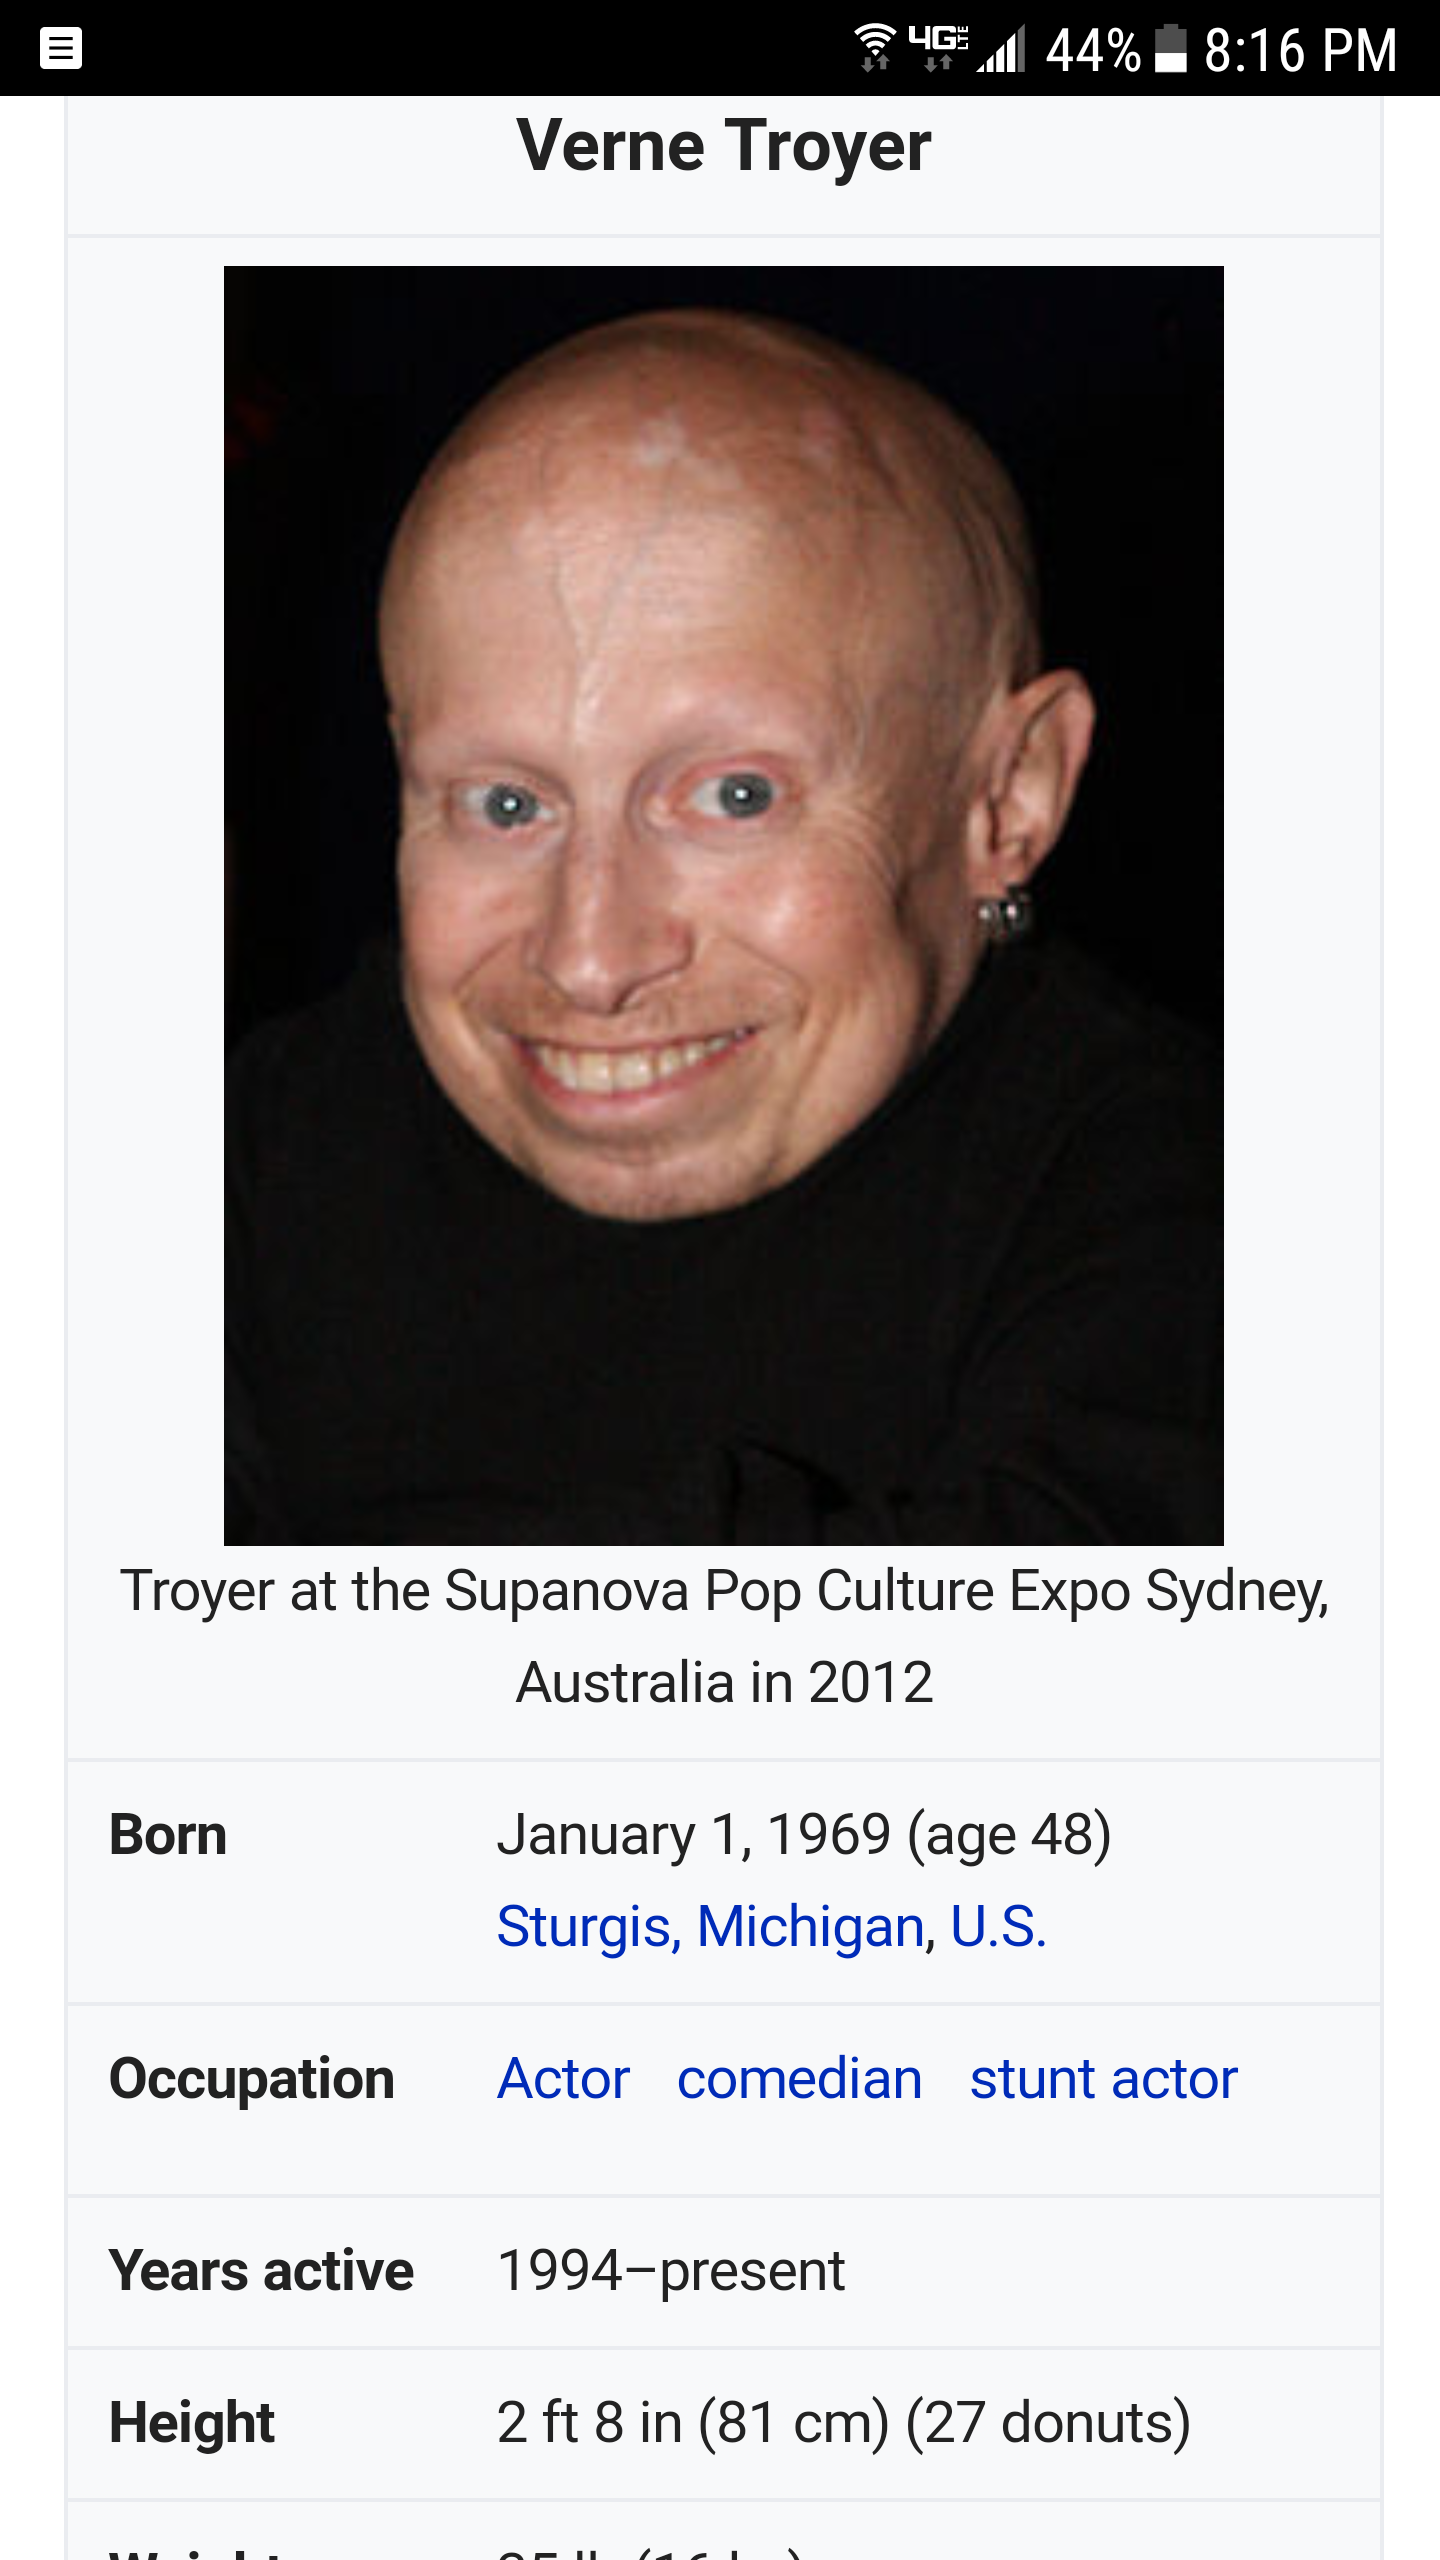 Verne Toyer's Wikipedia page lists him as being 27 donuts tall